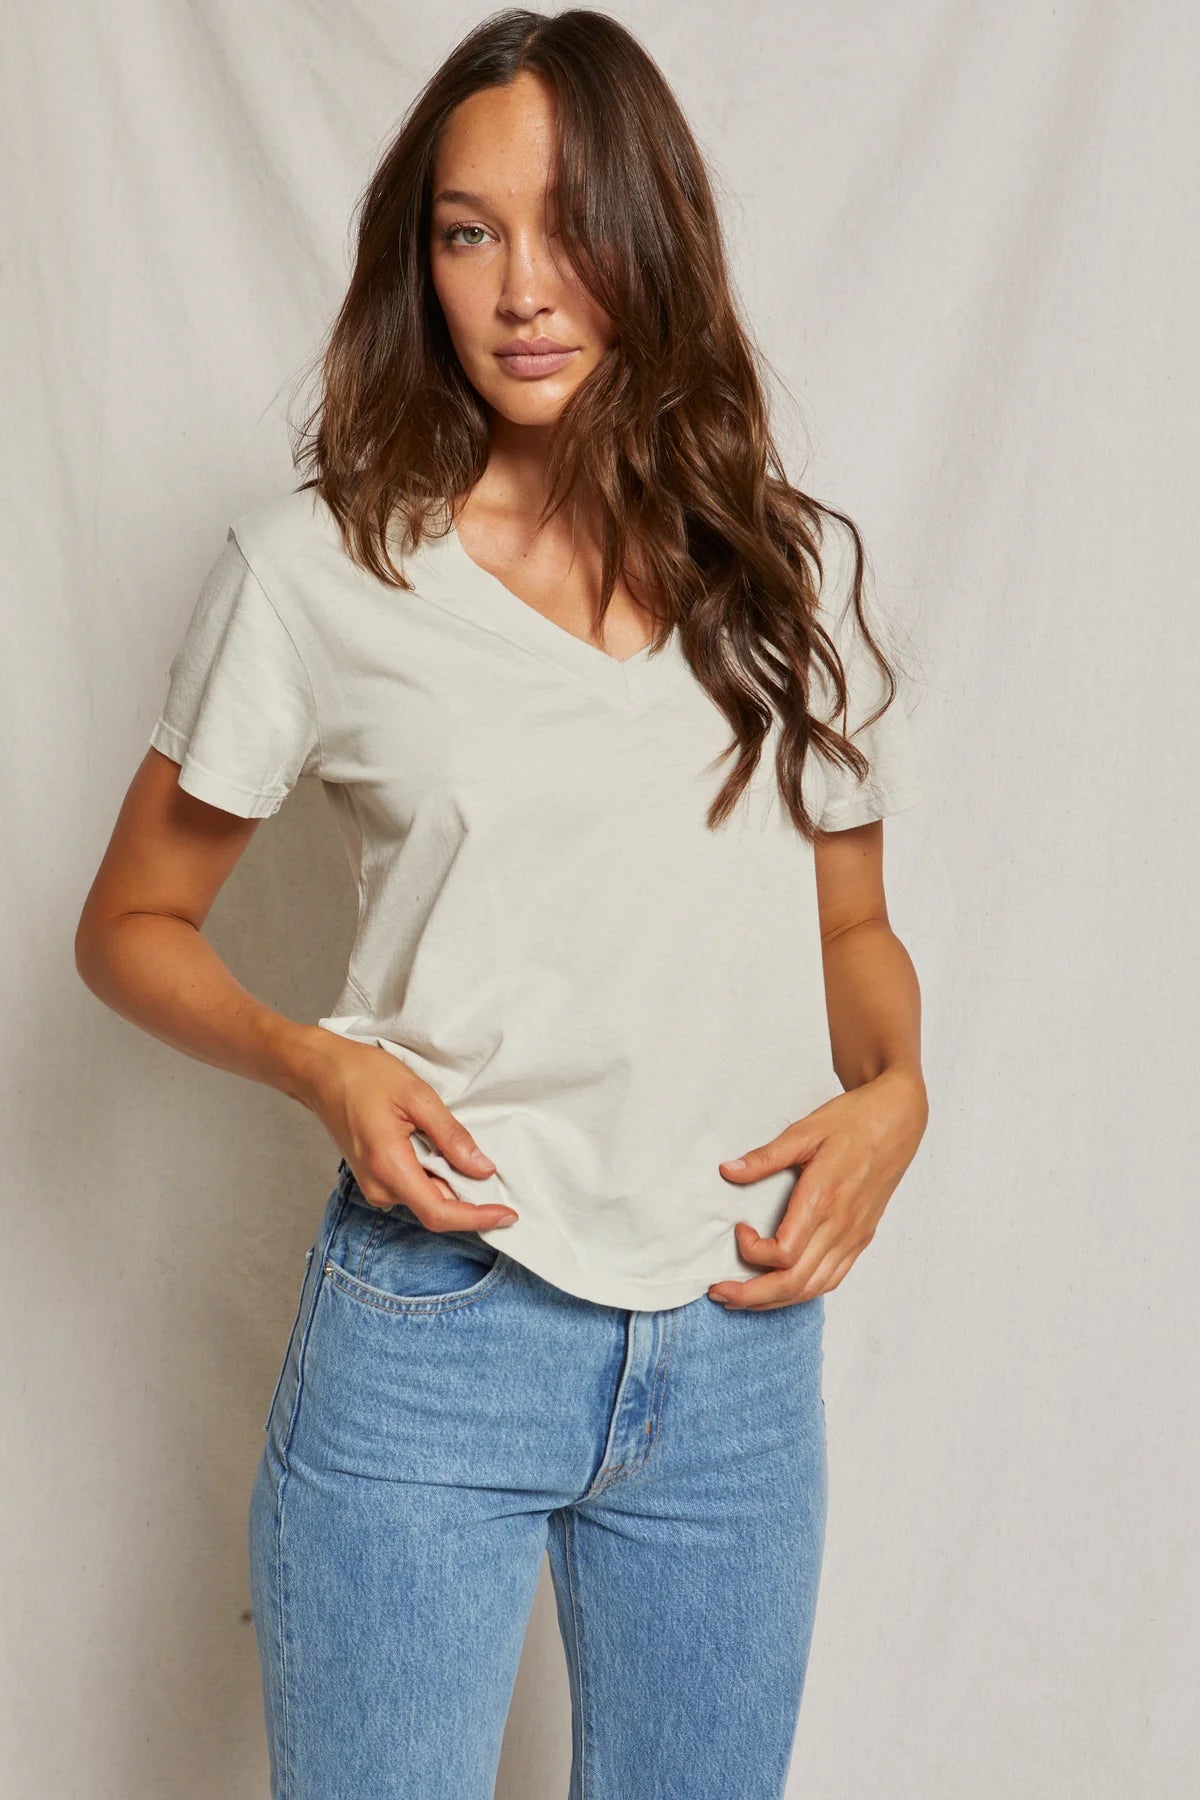 Perfect White Tee's Hendrix Boxy V Neck Tee in the color Chalk